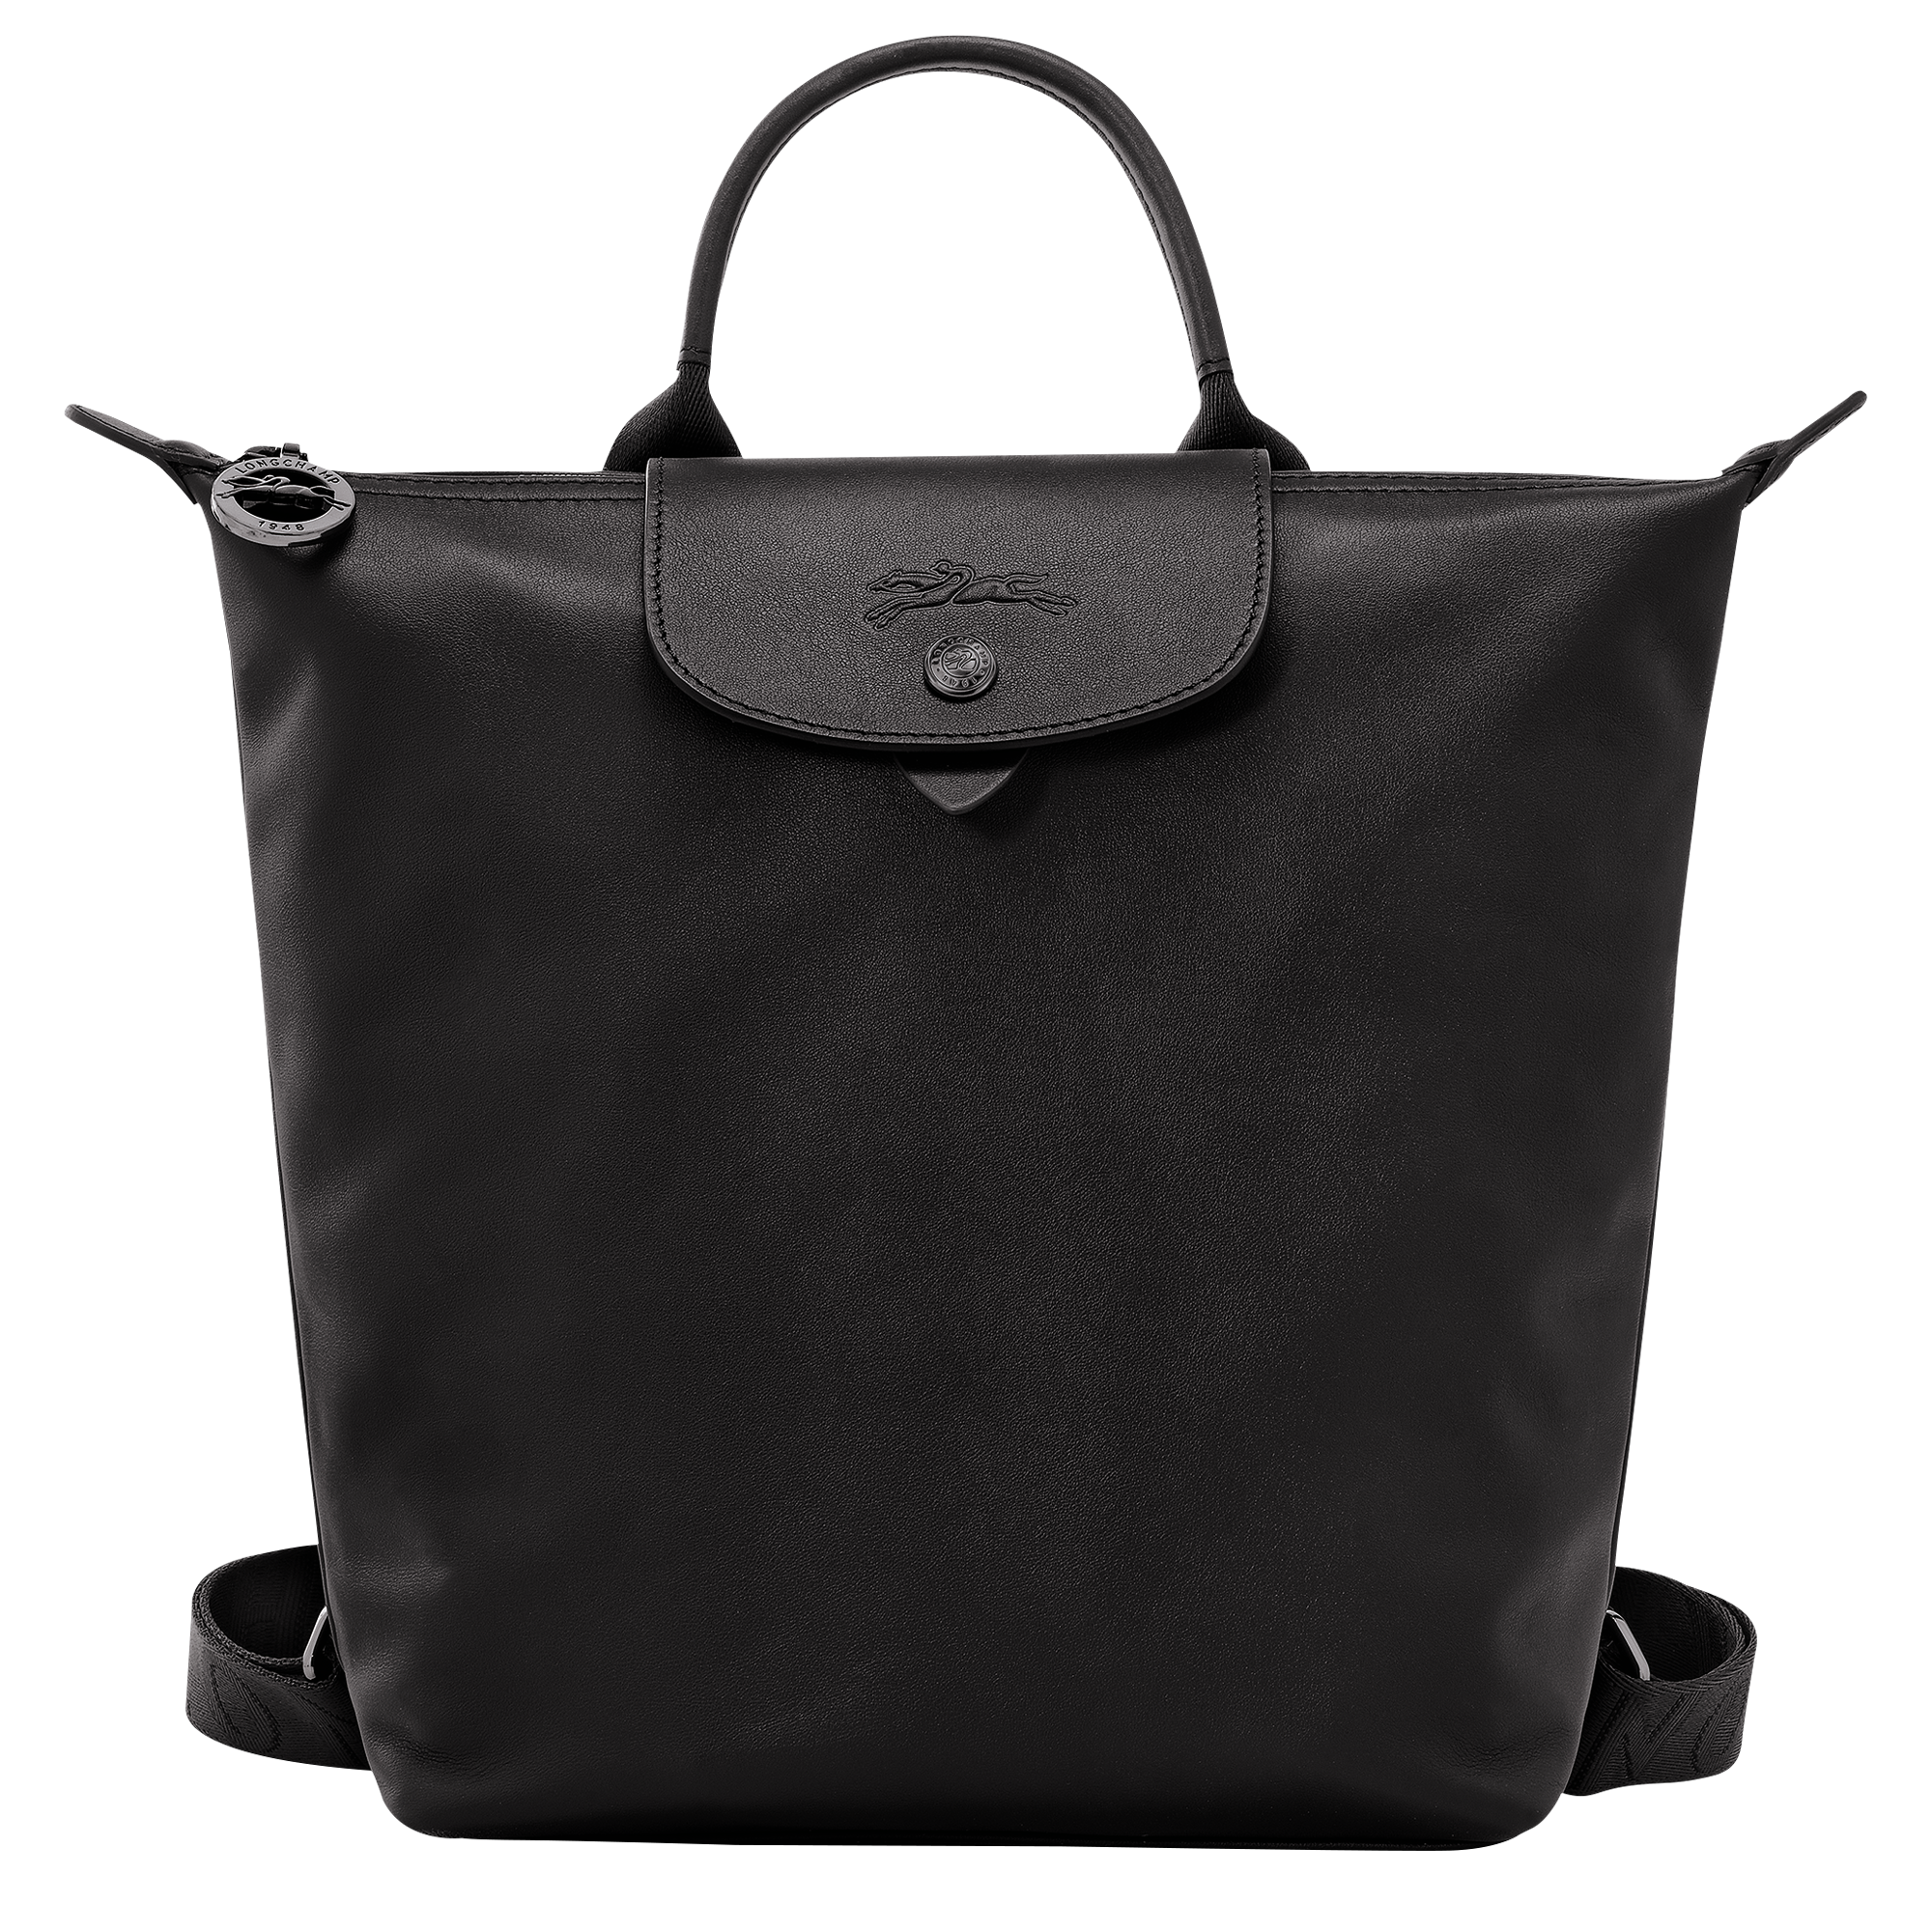 Discover the Longchamp Roseau bag featuring new colors and sizes, a  must-have for the season. Go to longchamp.co.id for more…